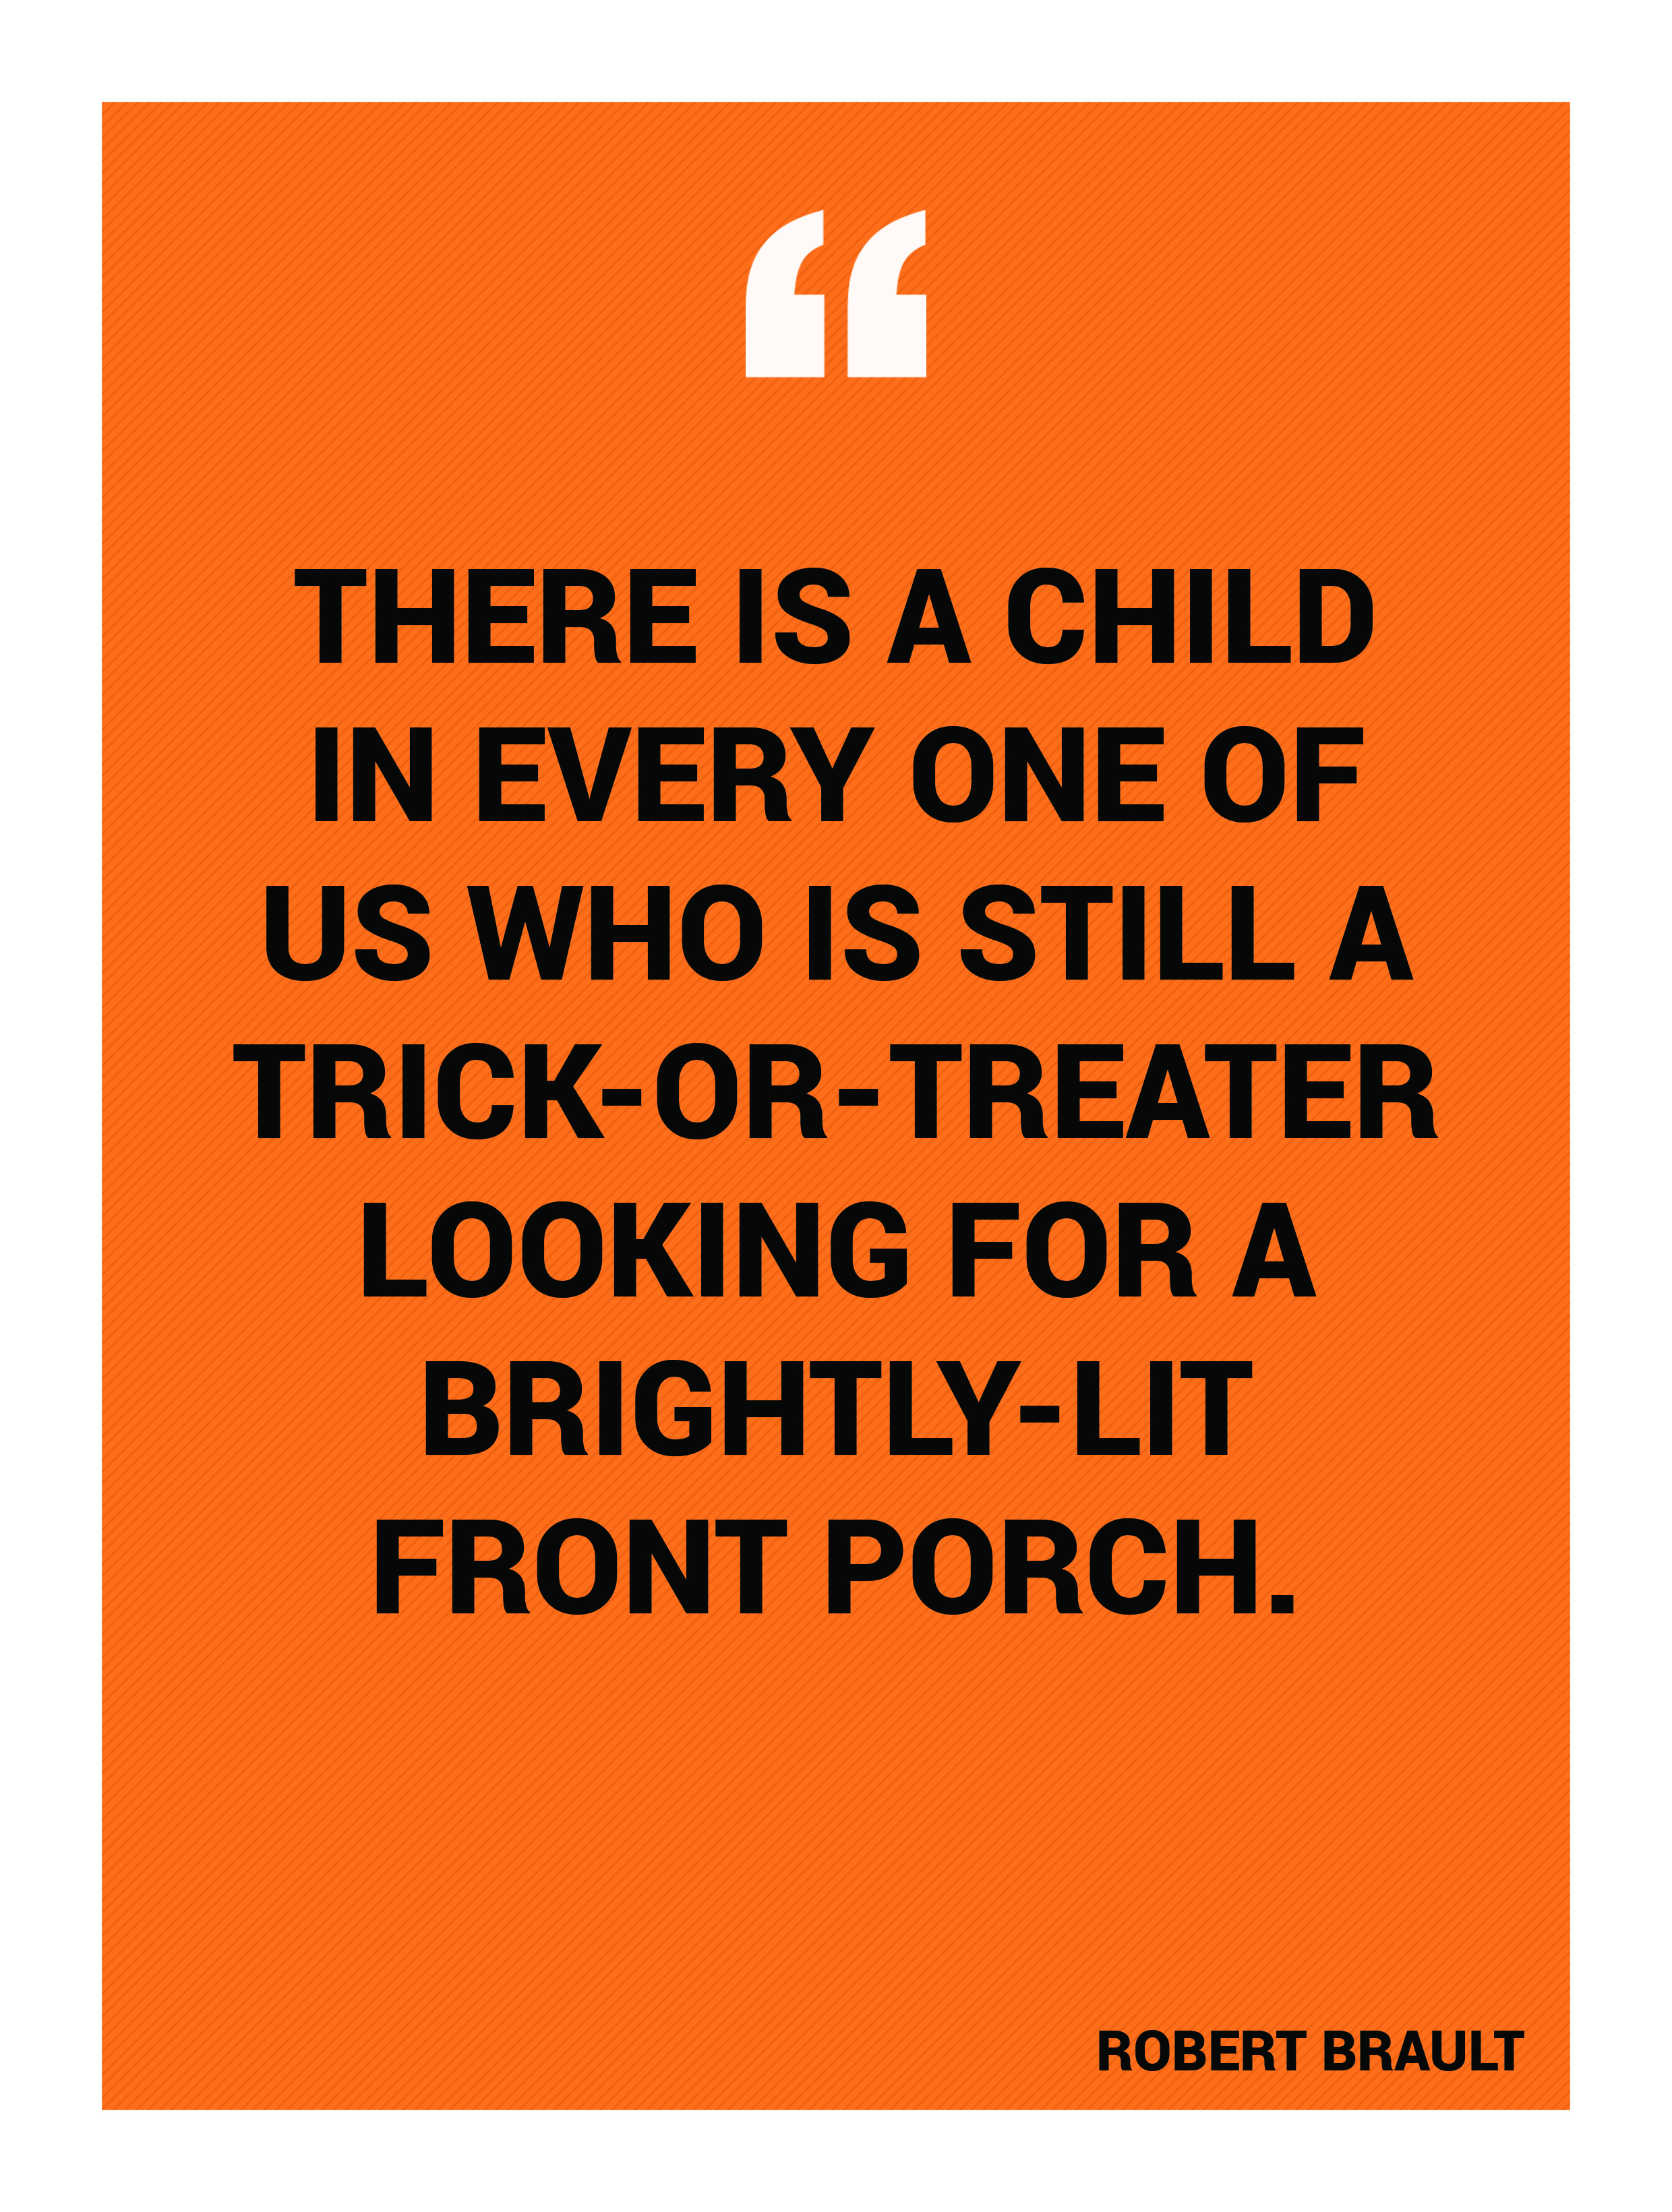 “There is a child in every one of us who is still a trick-or-treater looking for a brightly-lit front porch.” -Robert Brault